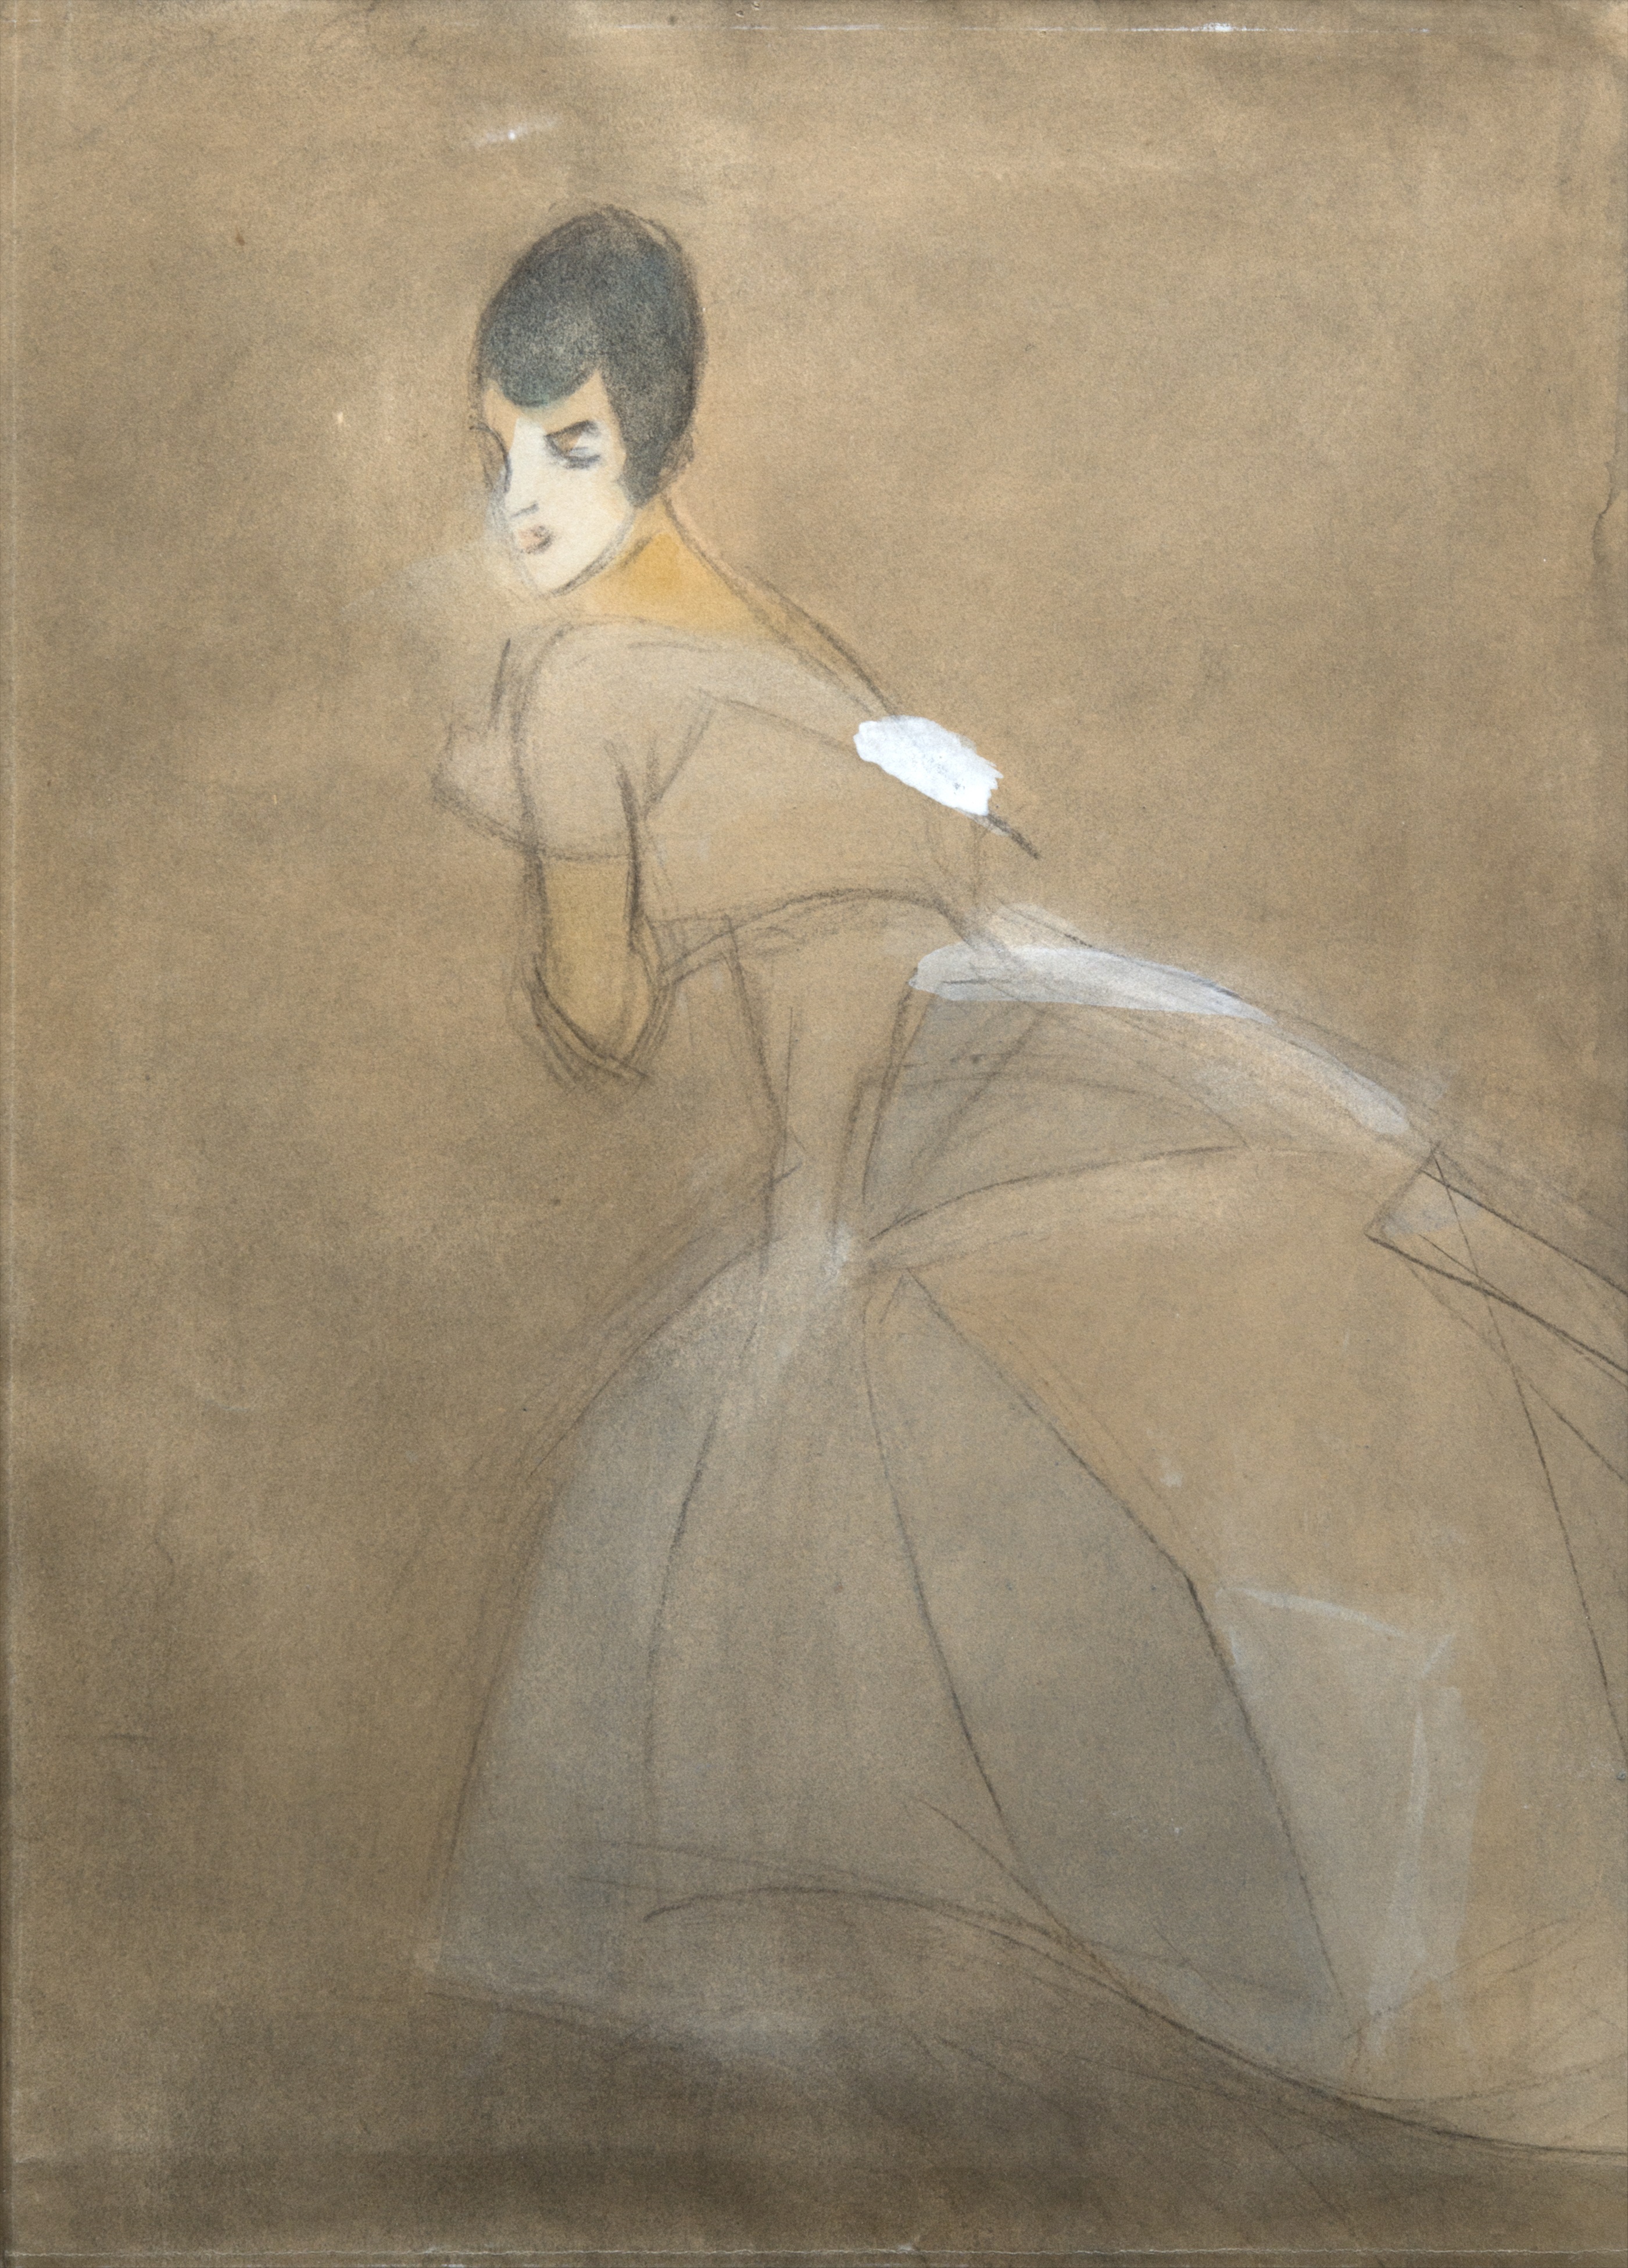 Helene Schjerfbeck: The Fleeing Countess, 1917, coal, watercolour and gouach on paper, Villa Gyllenberg / Signe and Ane Gyllenberg Foundation. Photo: Matias Uusikylä.